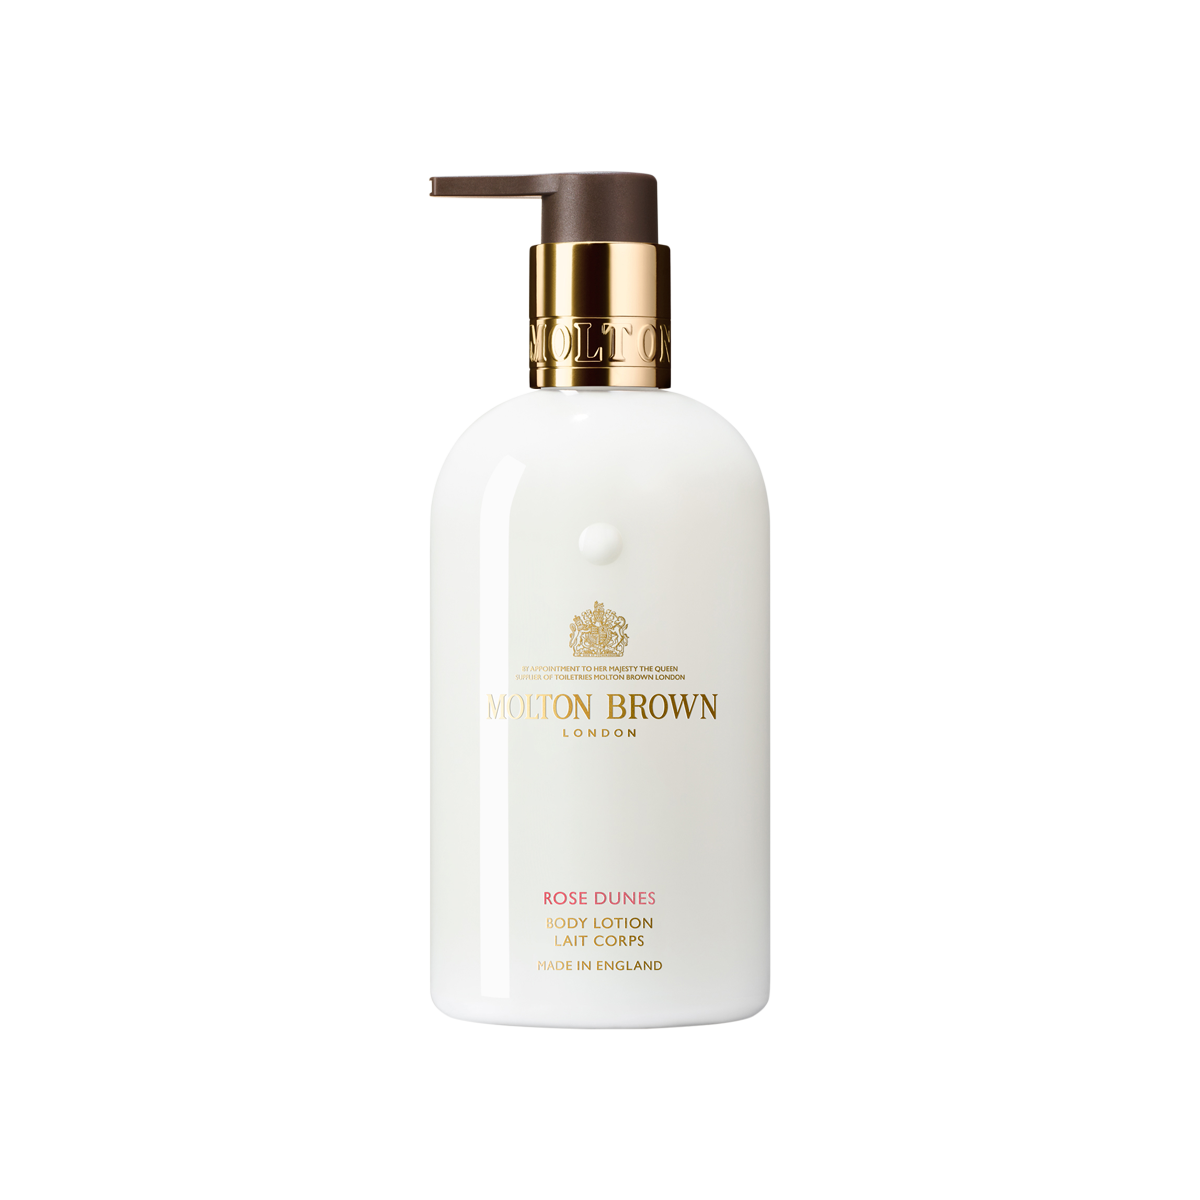 Molton Brown - Rose Dunes Body Lotion